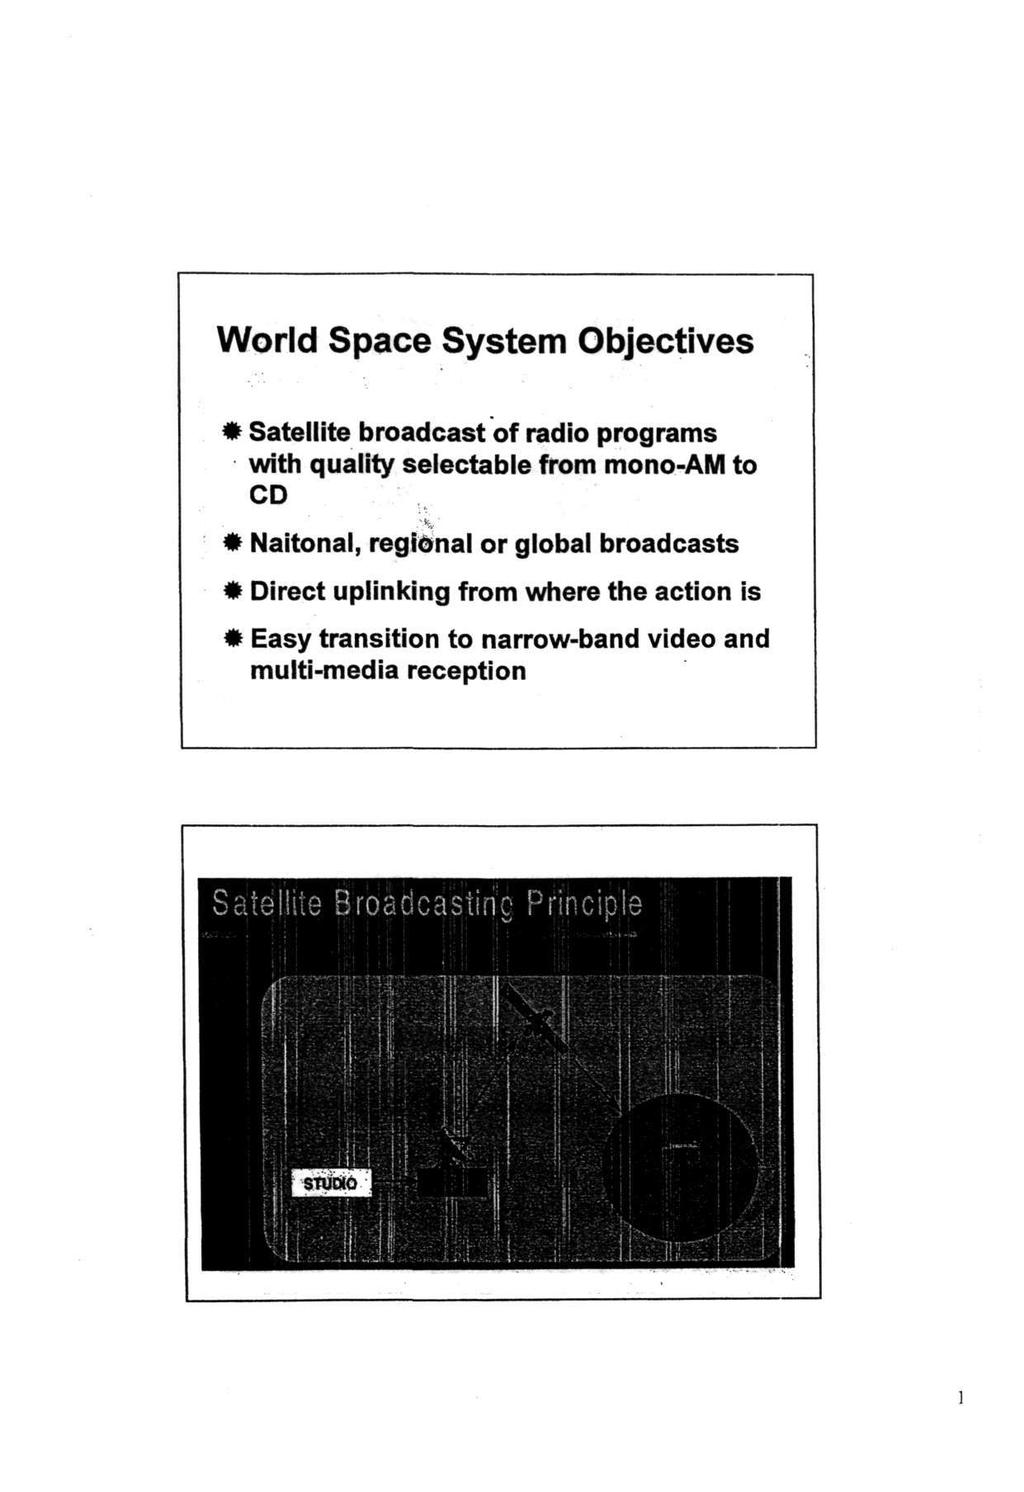 World Space System Objectives * Satellite broadcast of radio programs with quality selectable from mono-am to CD % # Naitonal,